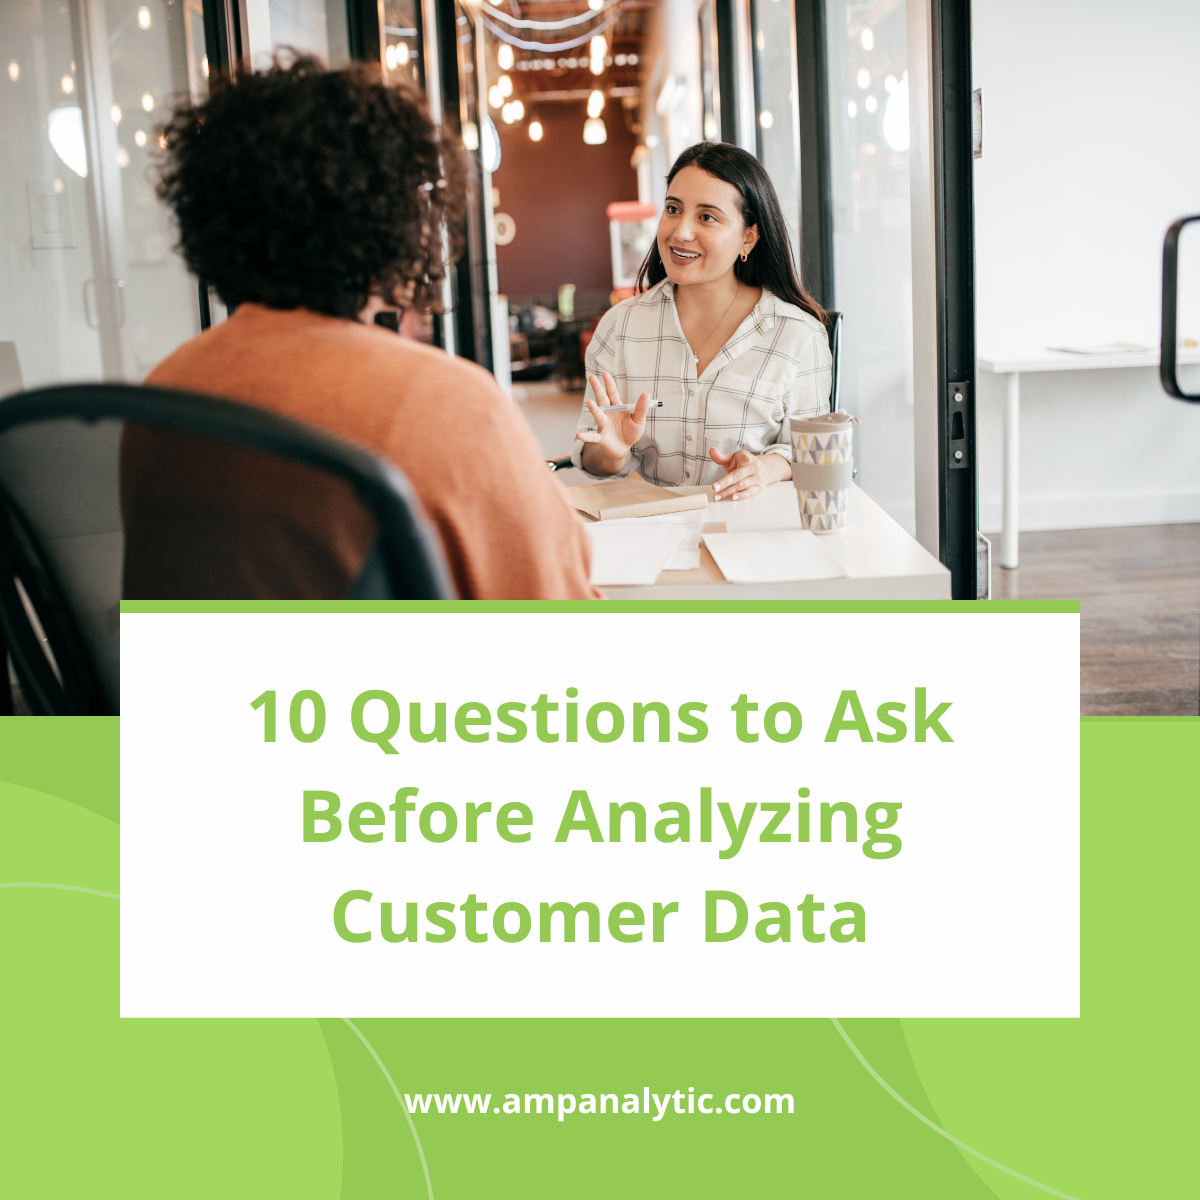 10 Questions to Ask Before Analyzing Customer Data